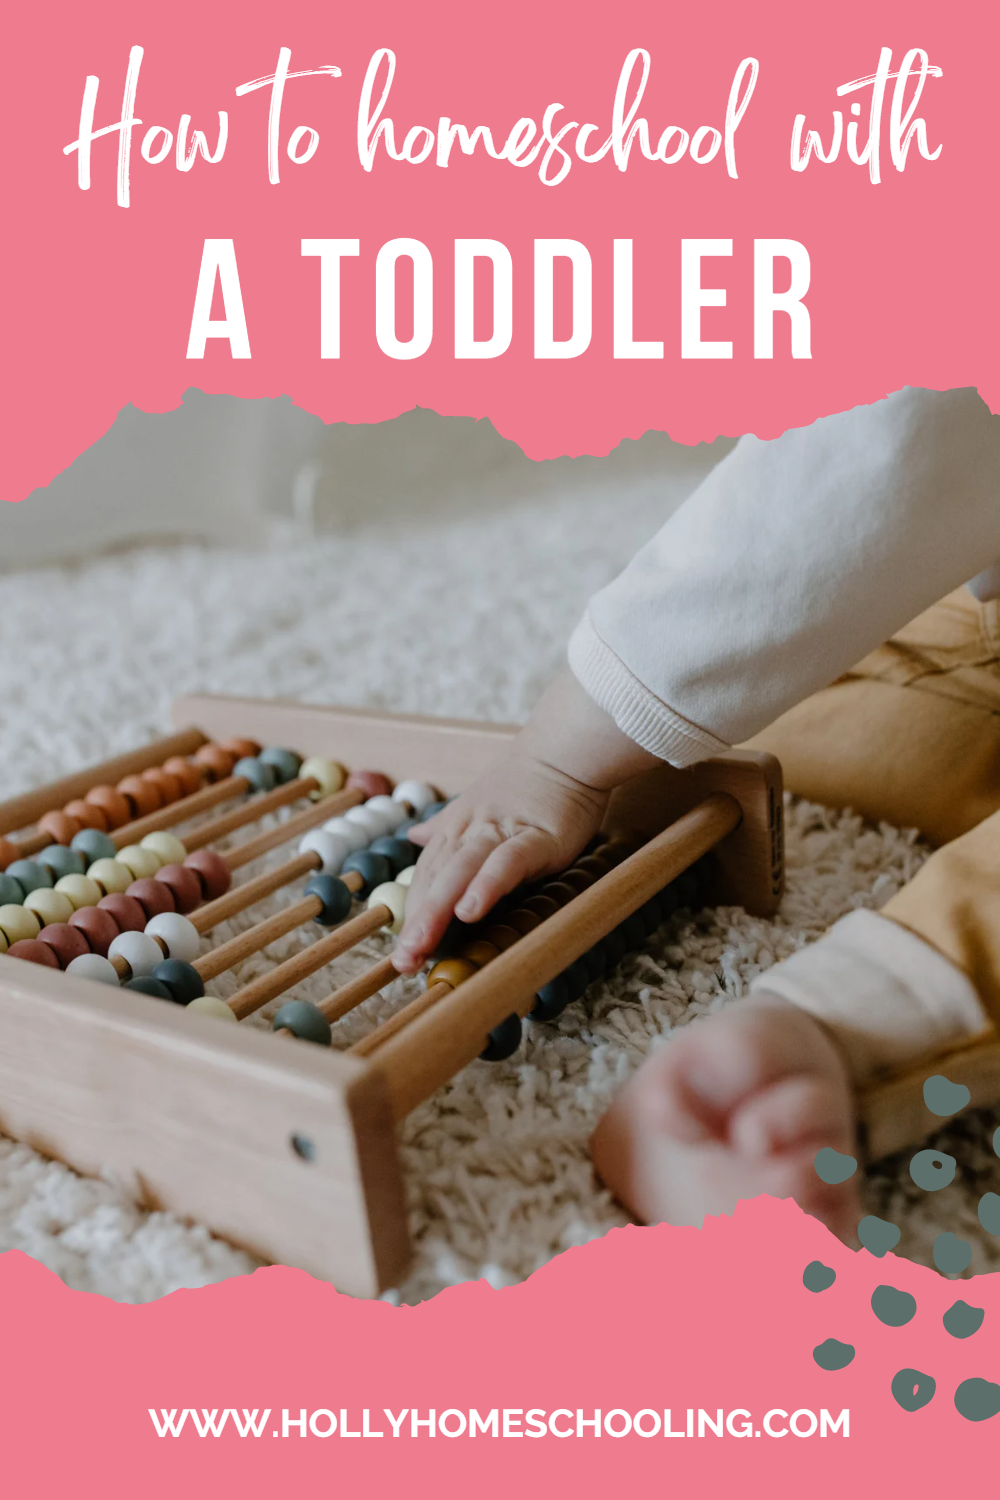 How to Homeschool When You Have a Toddler